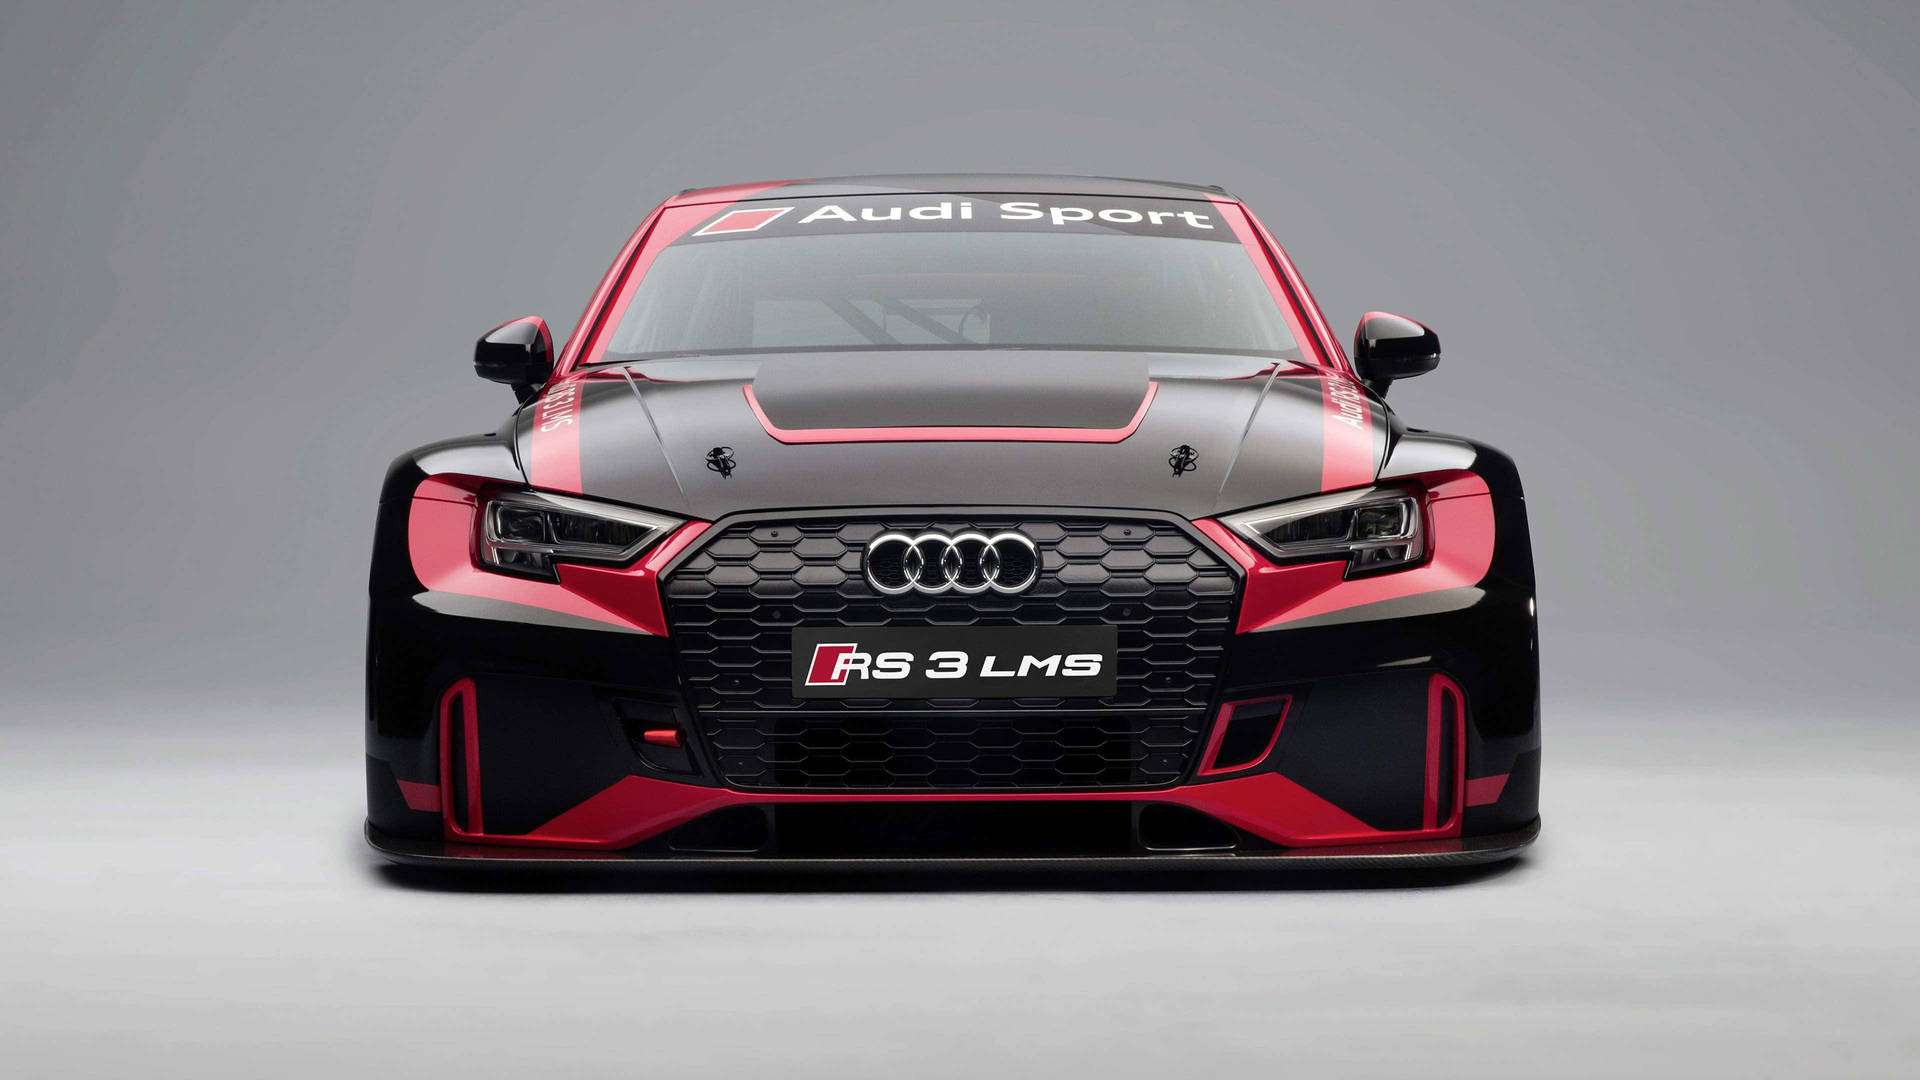 Audi RS 3 LMS Front View Wallpaper